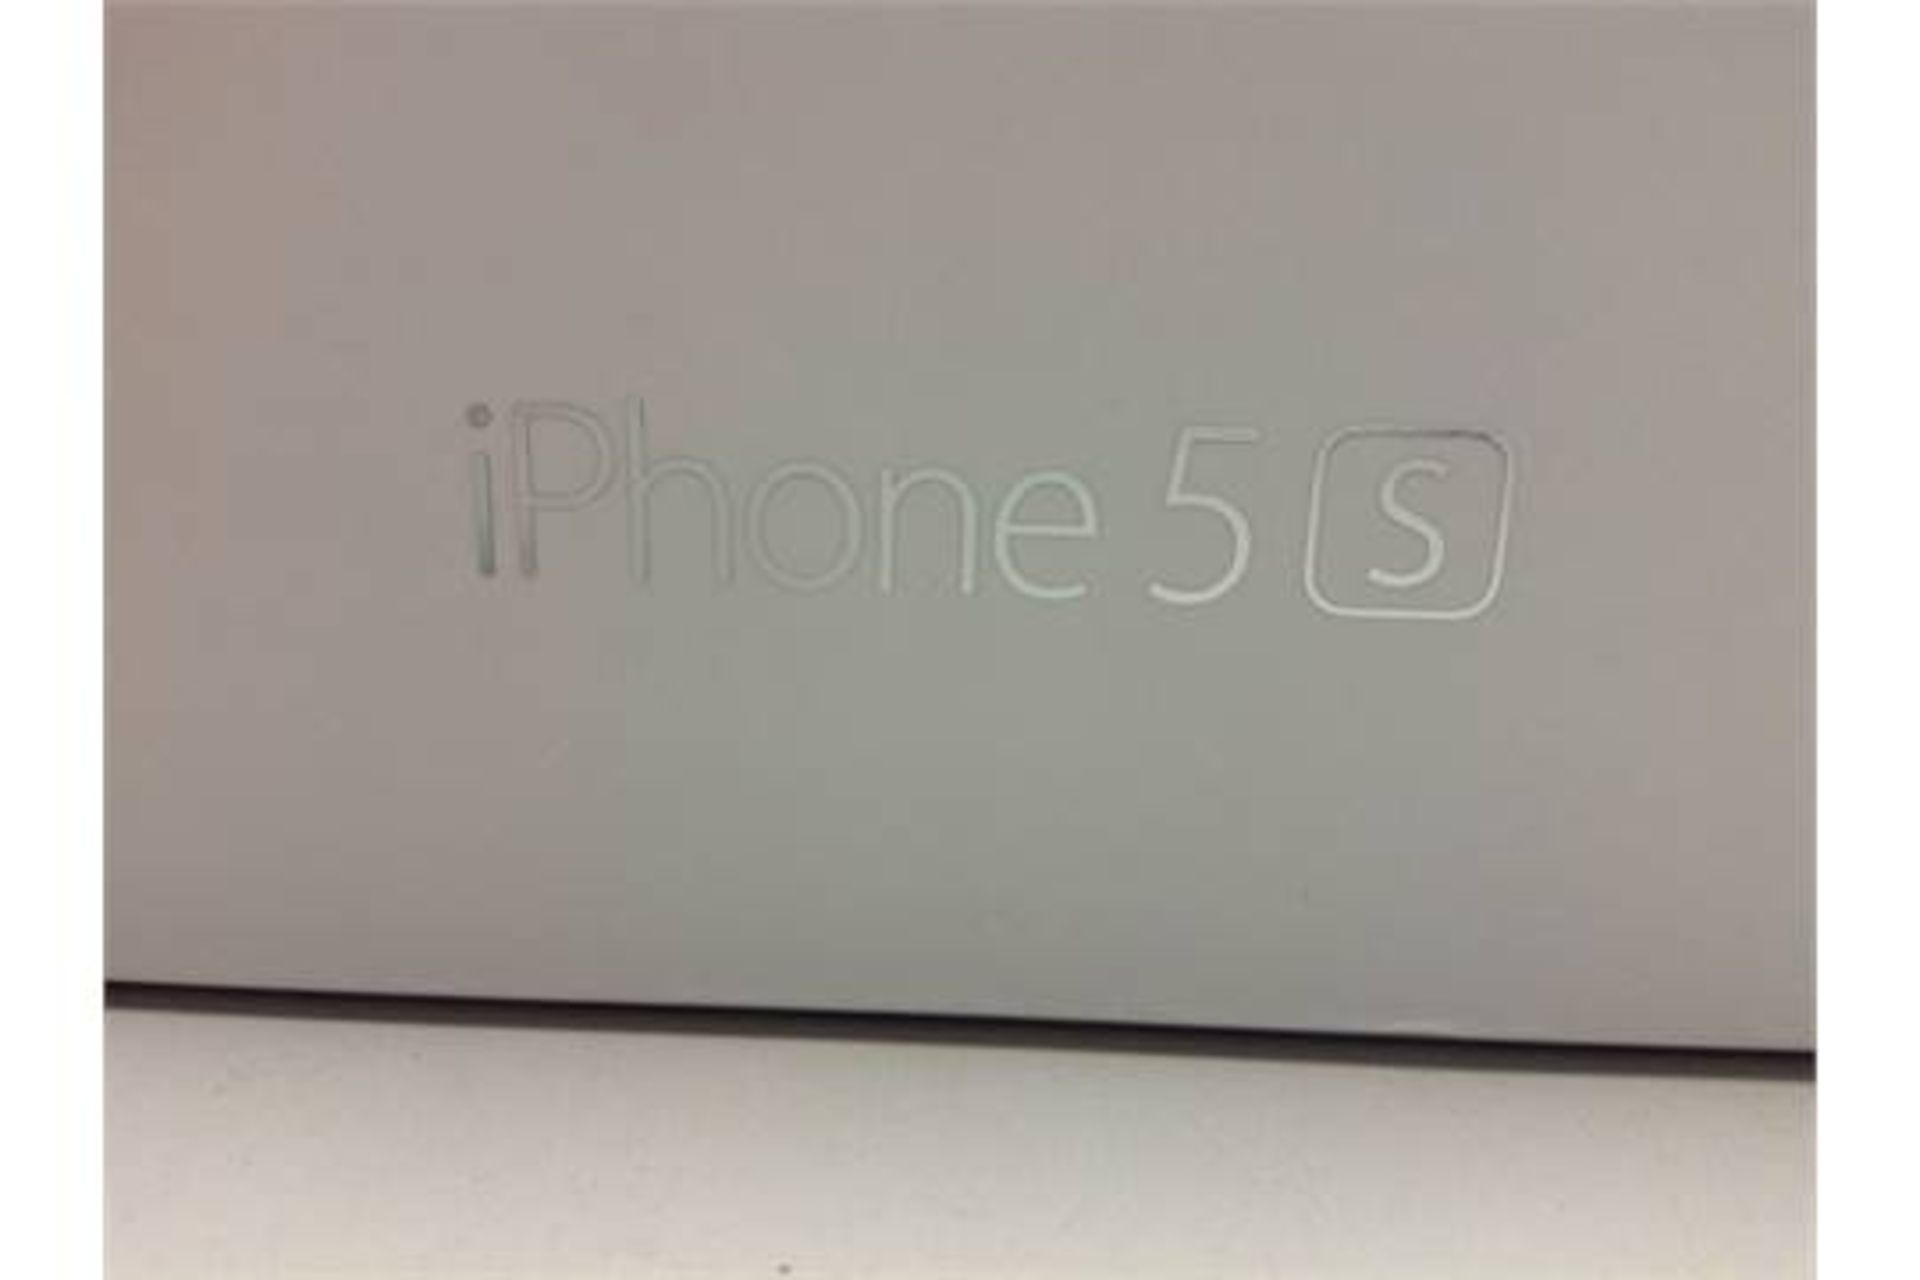 IPHONE 5S 16GB SILVER UNLOCKED PERFECT WORKING ORDER - Image 3 of 9